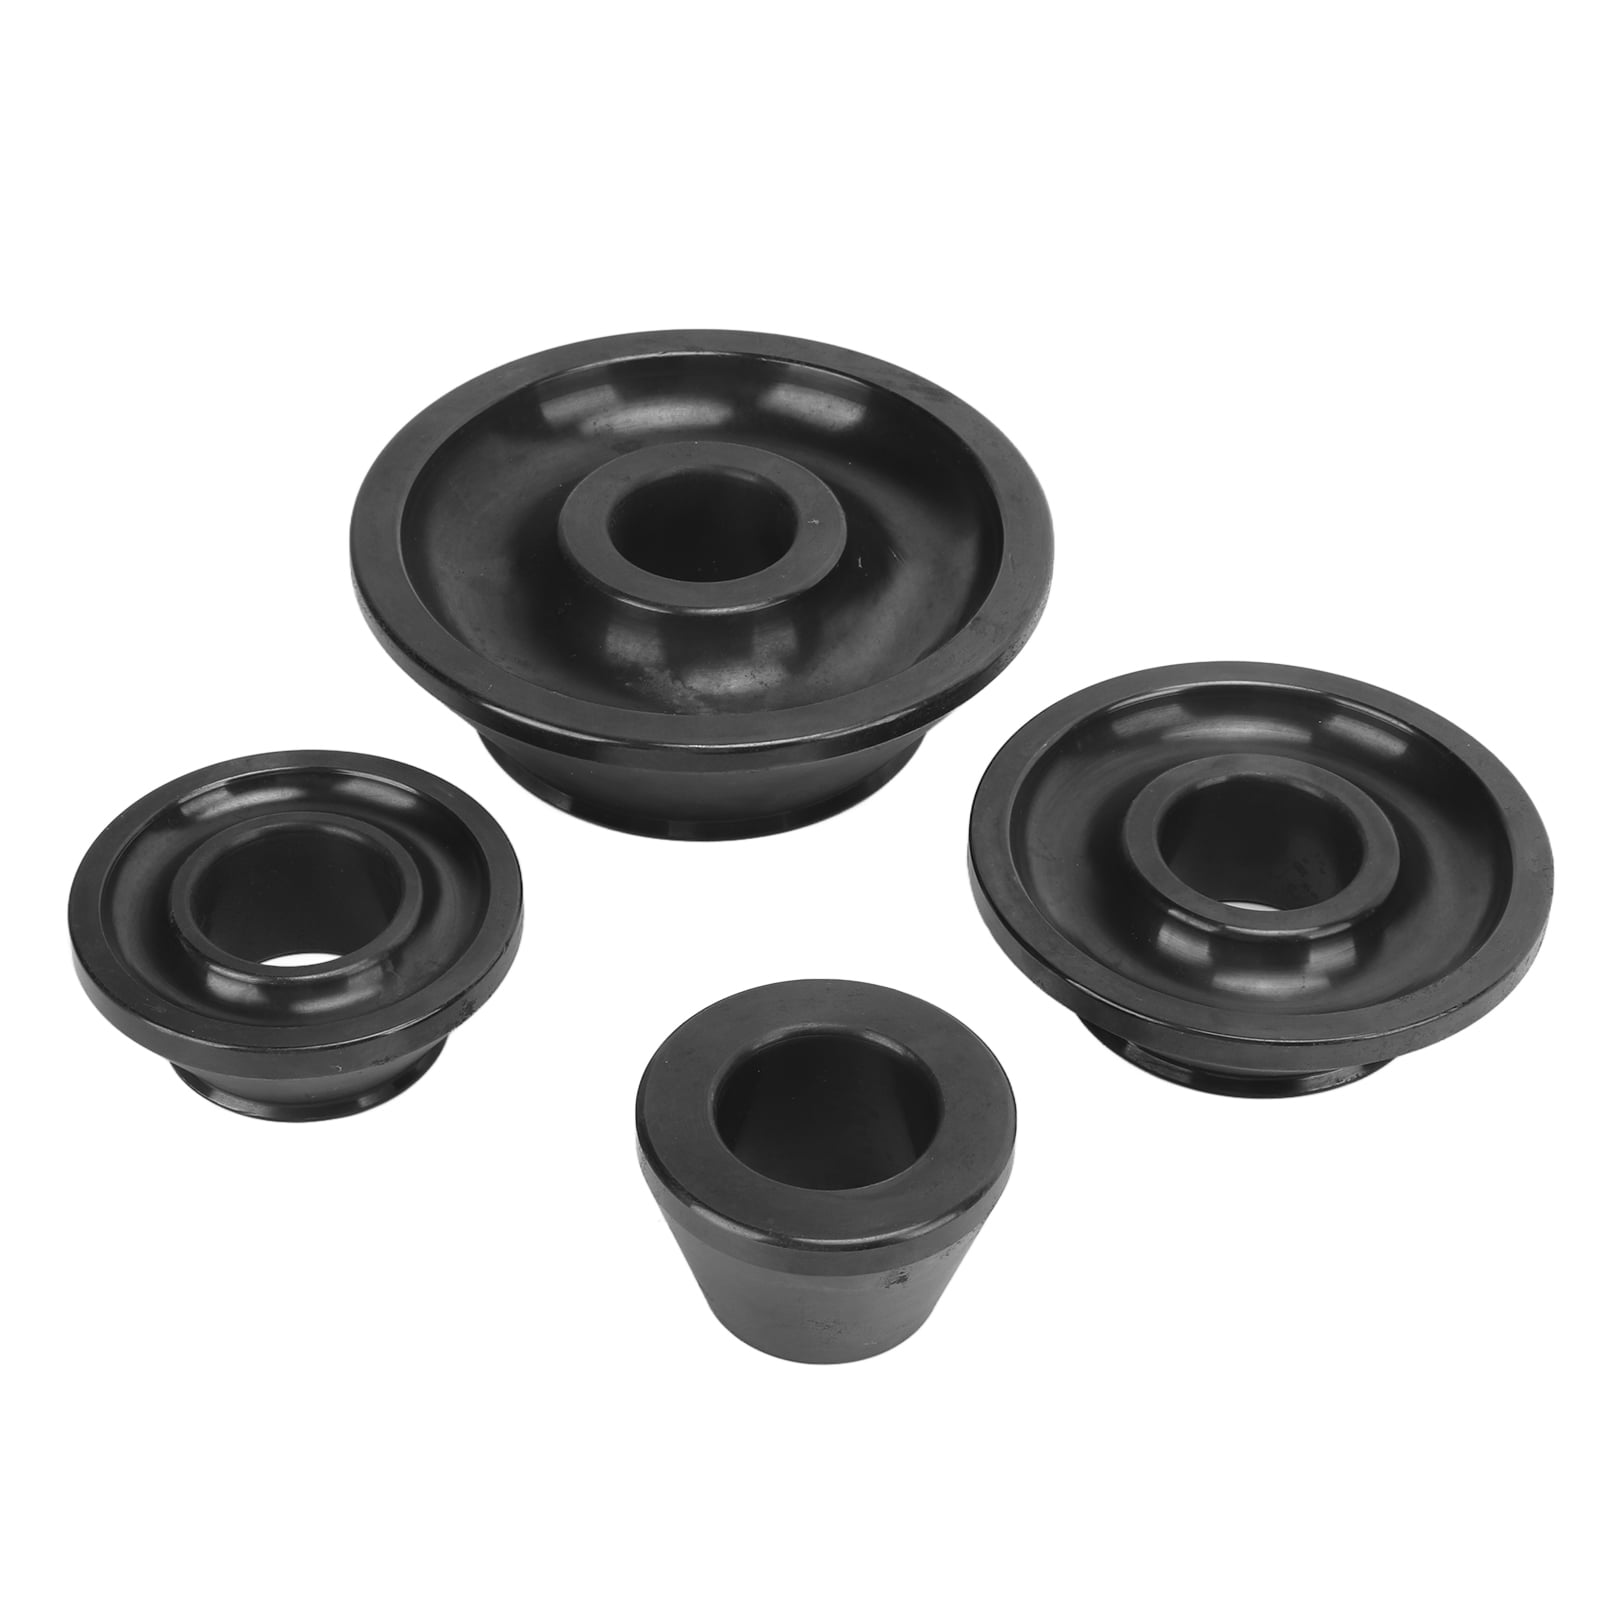 Black Motorcycle Adapters for Wheel Balancer Machine Package 36mm Shaft 